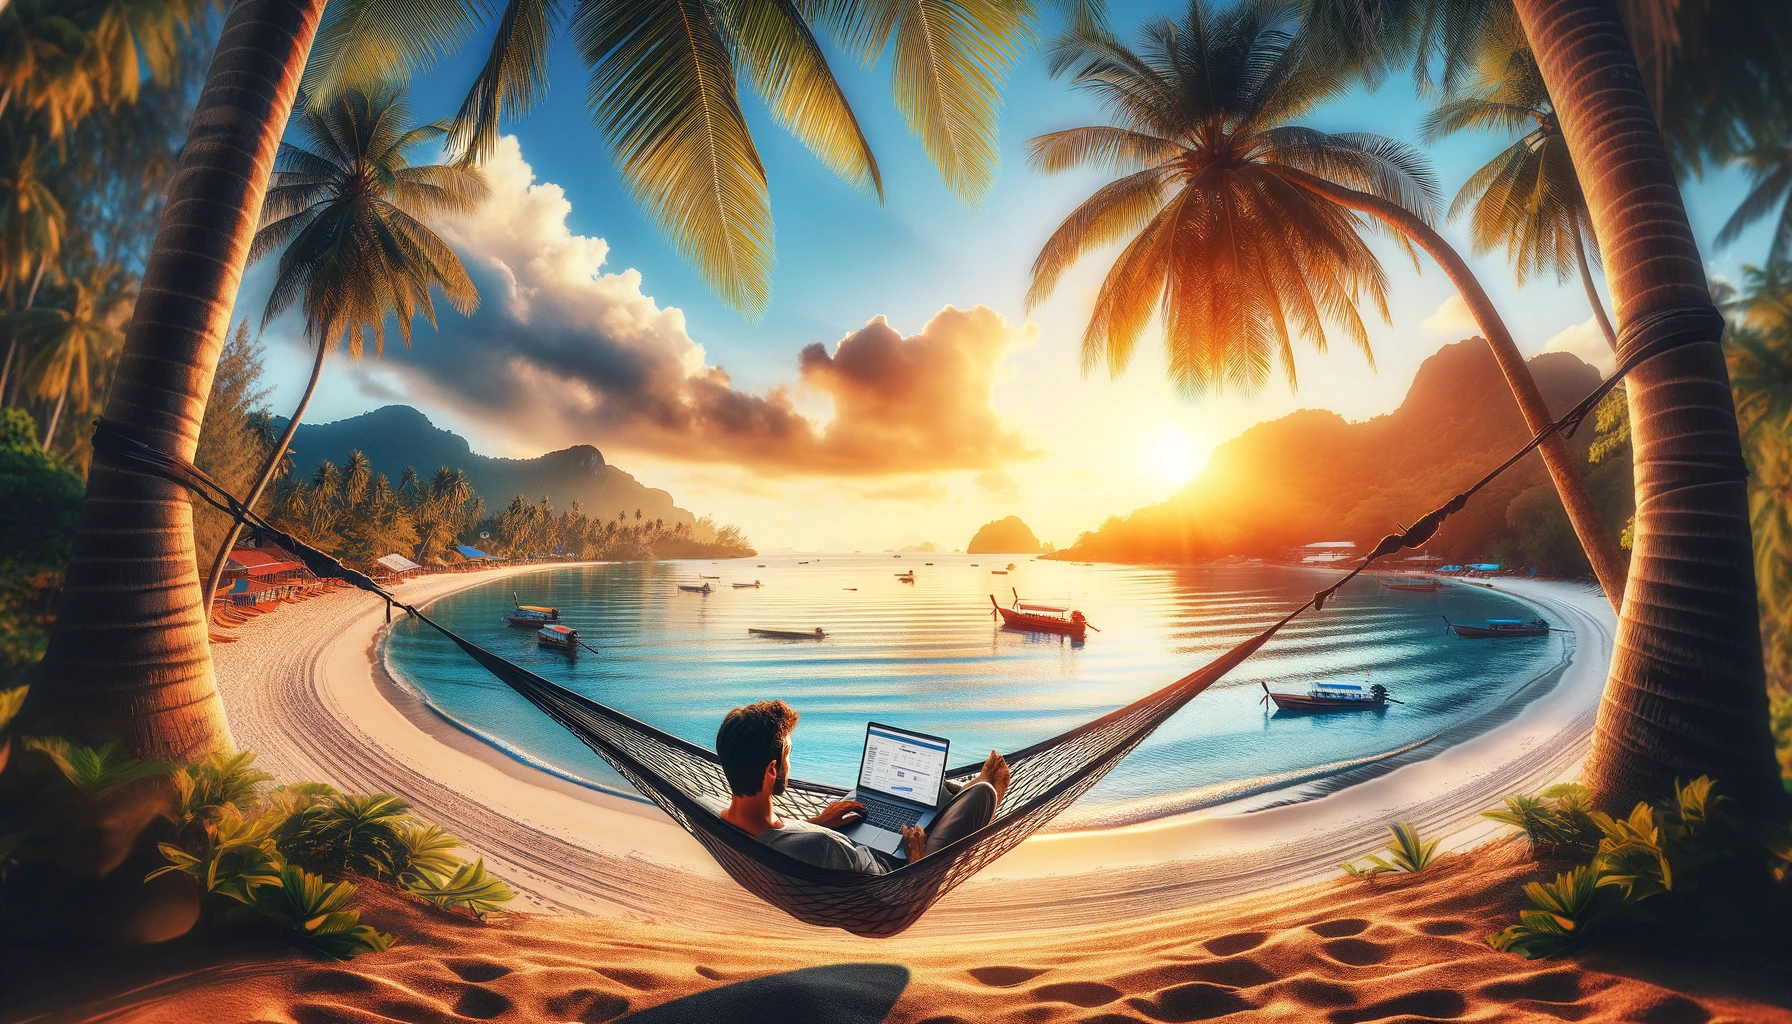 A Day in the Life of a Digital Nomad in Koh Samui: A Paradise for Remote Workers